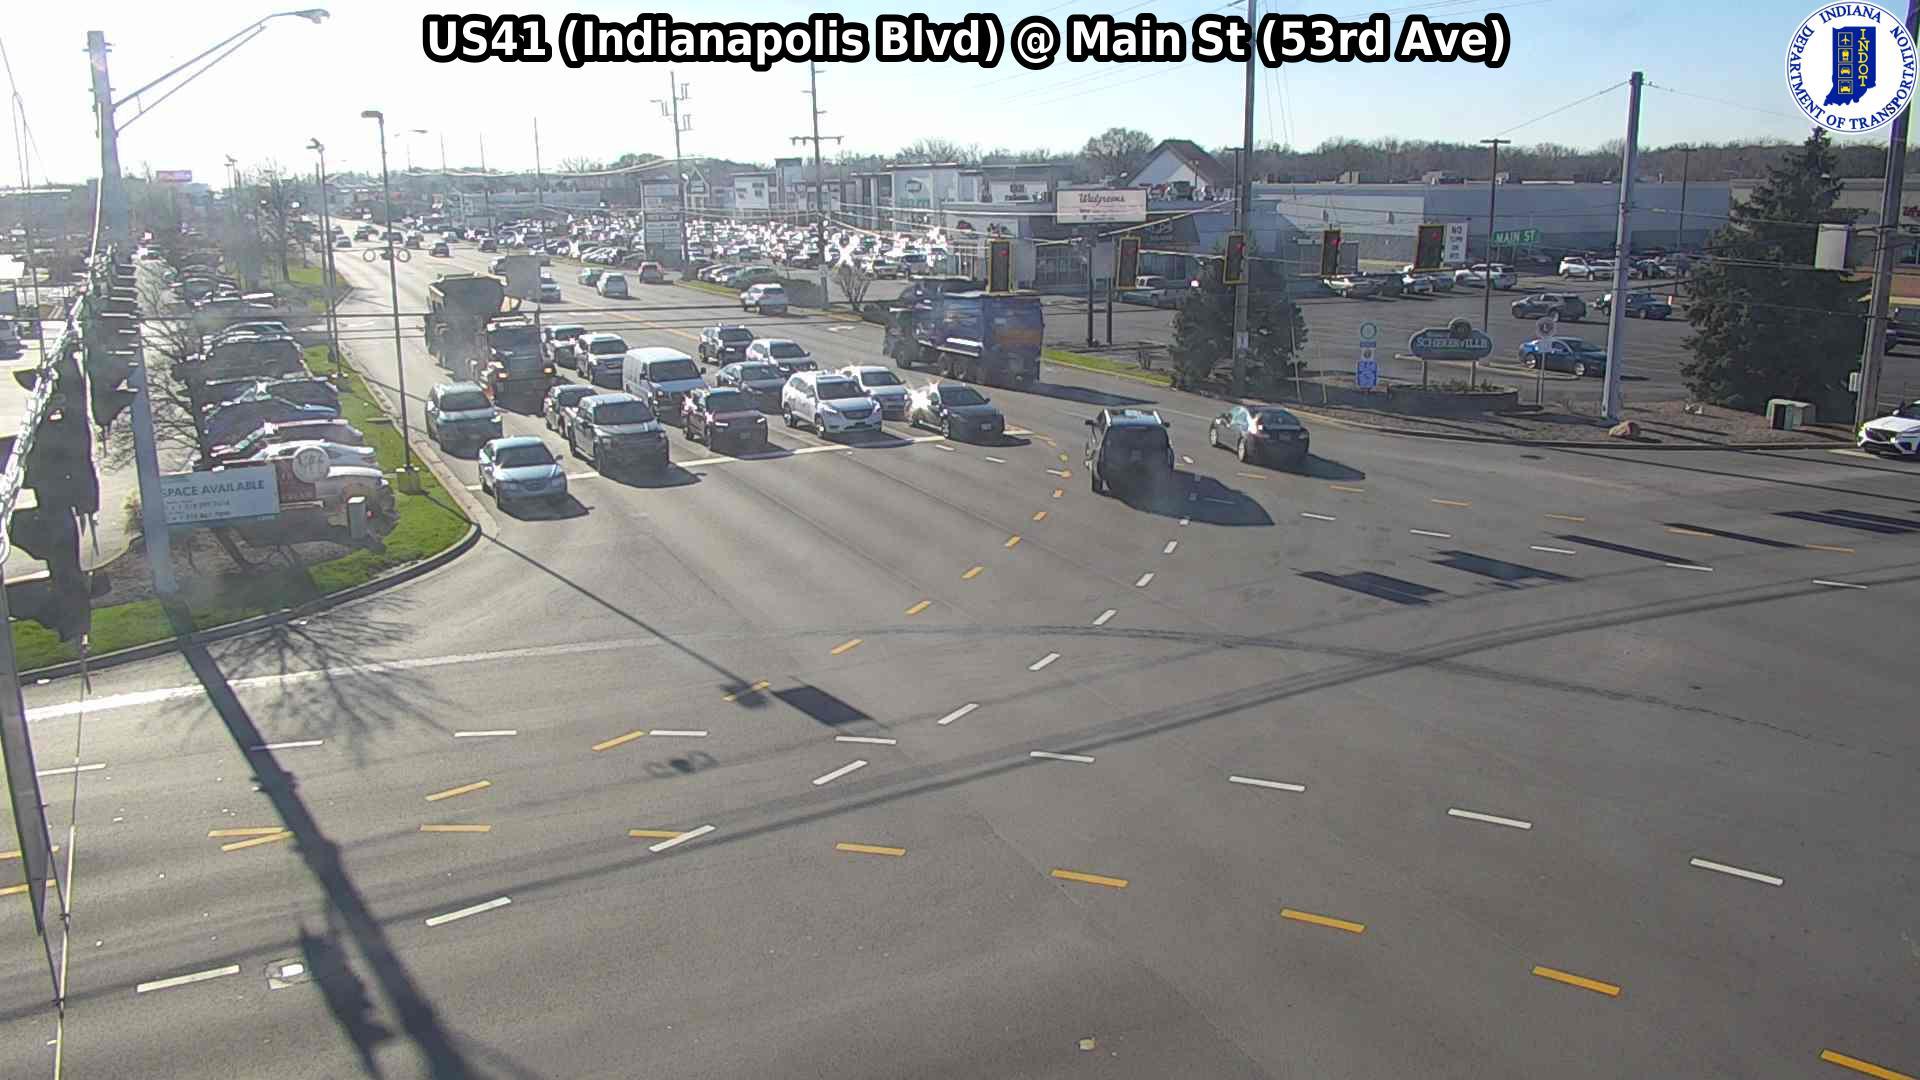 Schererville: SIGNAL: US41 (Indianapolis Blvd) @ Main St (53rd Ave Traffic Camera